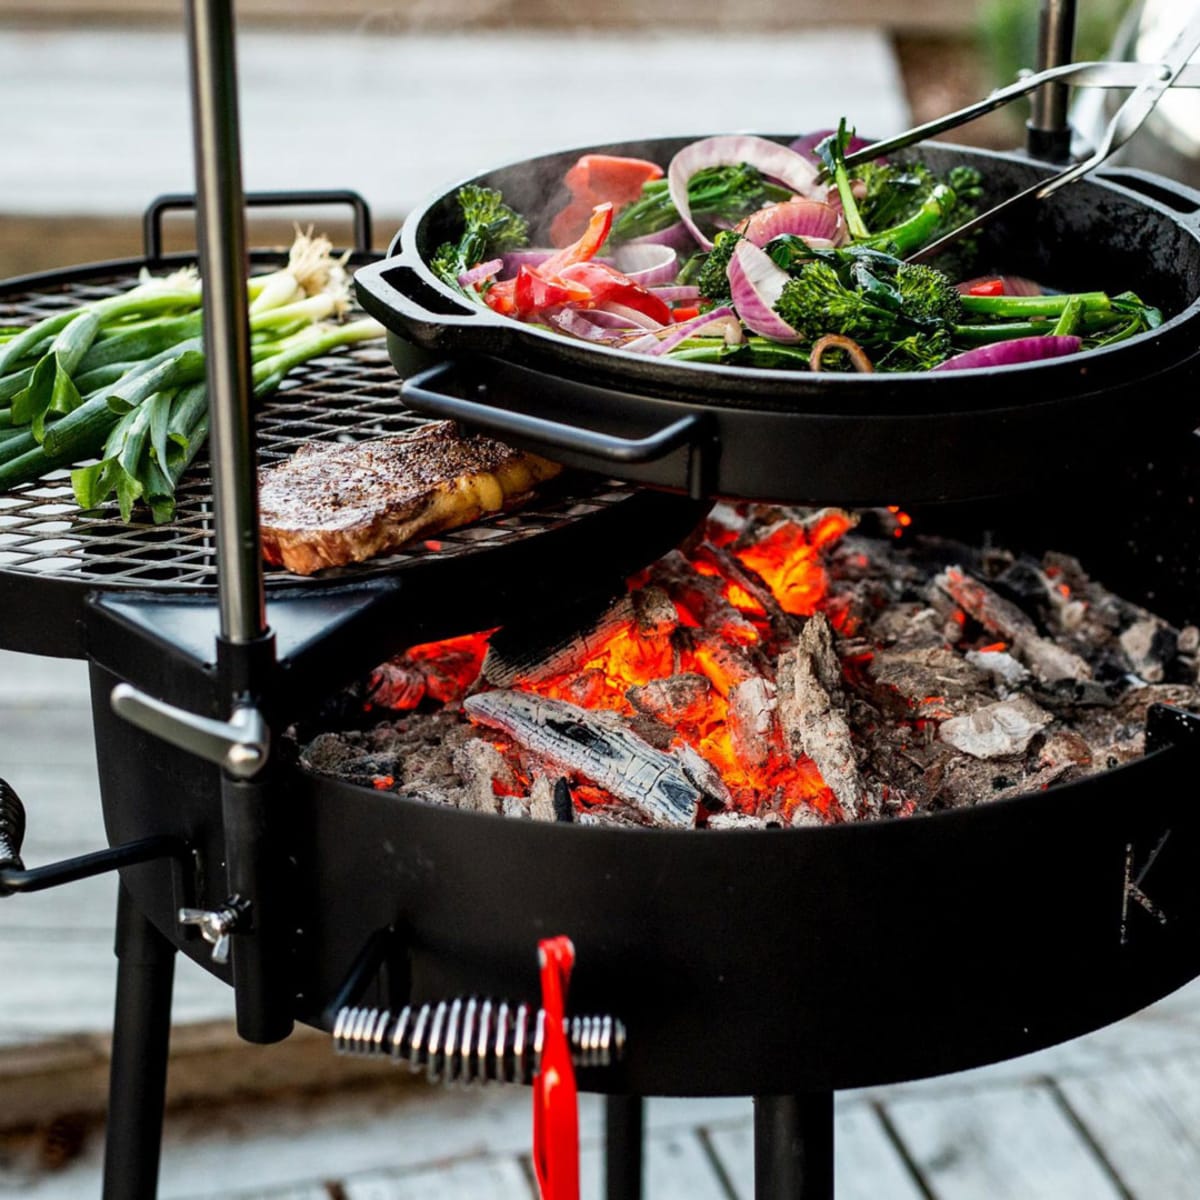 Top Tips for Cooking on an Open Fire Cooker - Kudu Grills